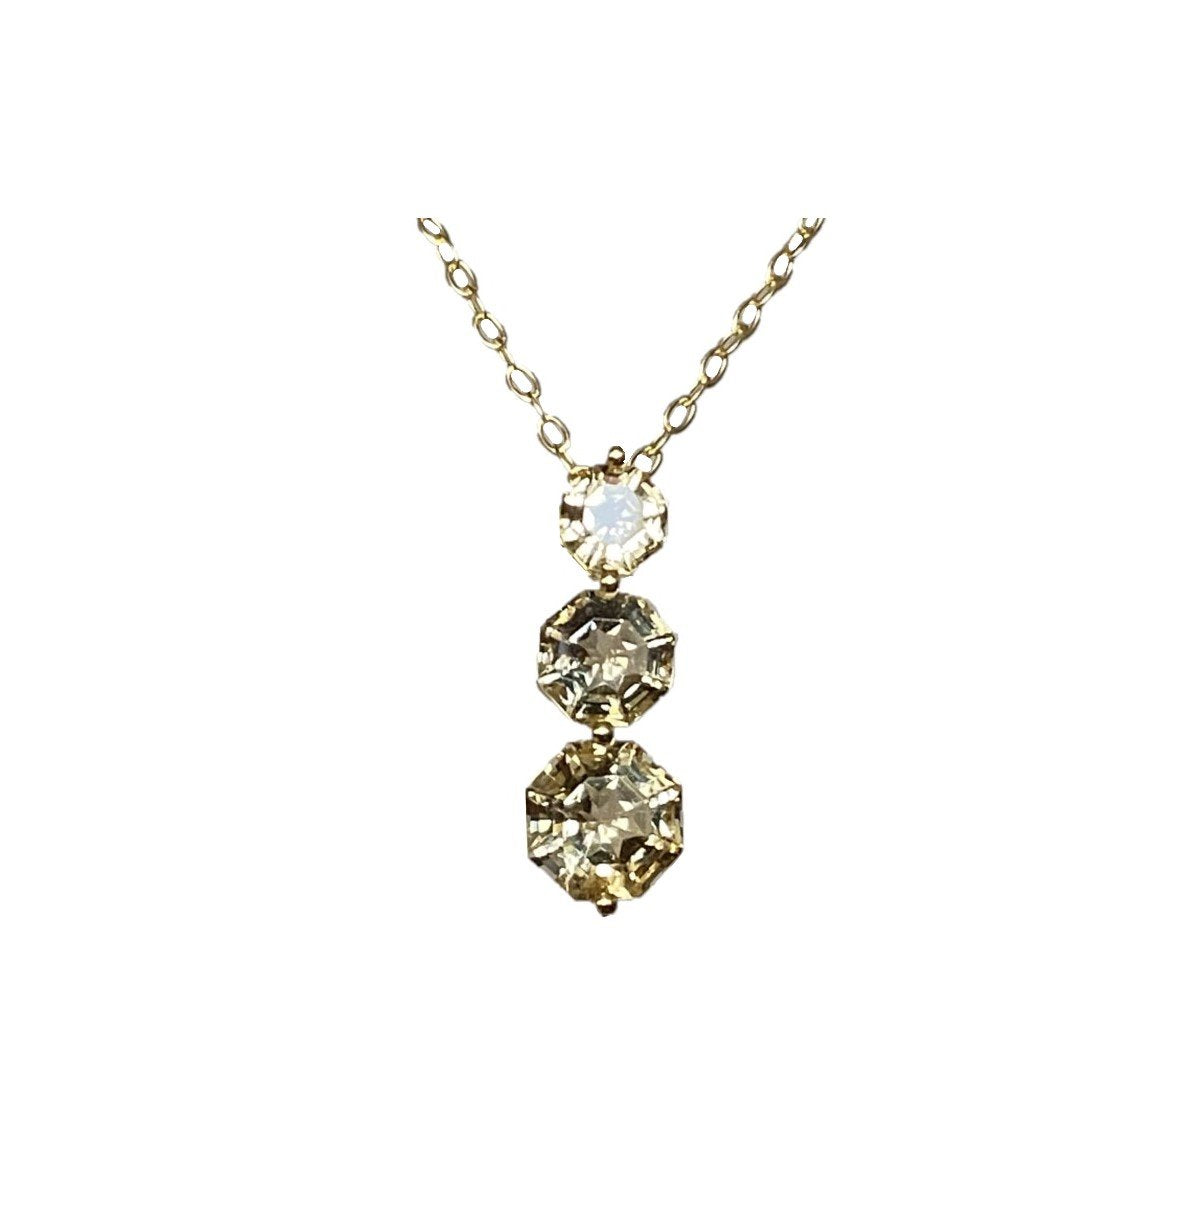 FARA Three Stone Citrine Drop Pendant Necklace,18K Gold Plated Sterling Silver with 18 inch Chain